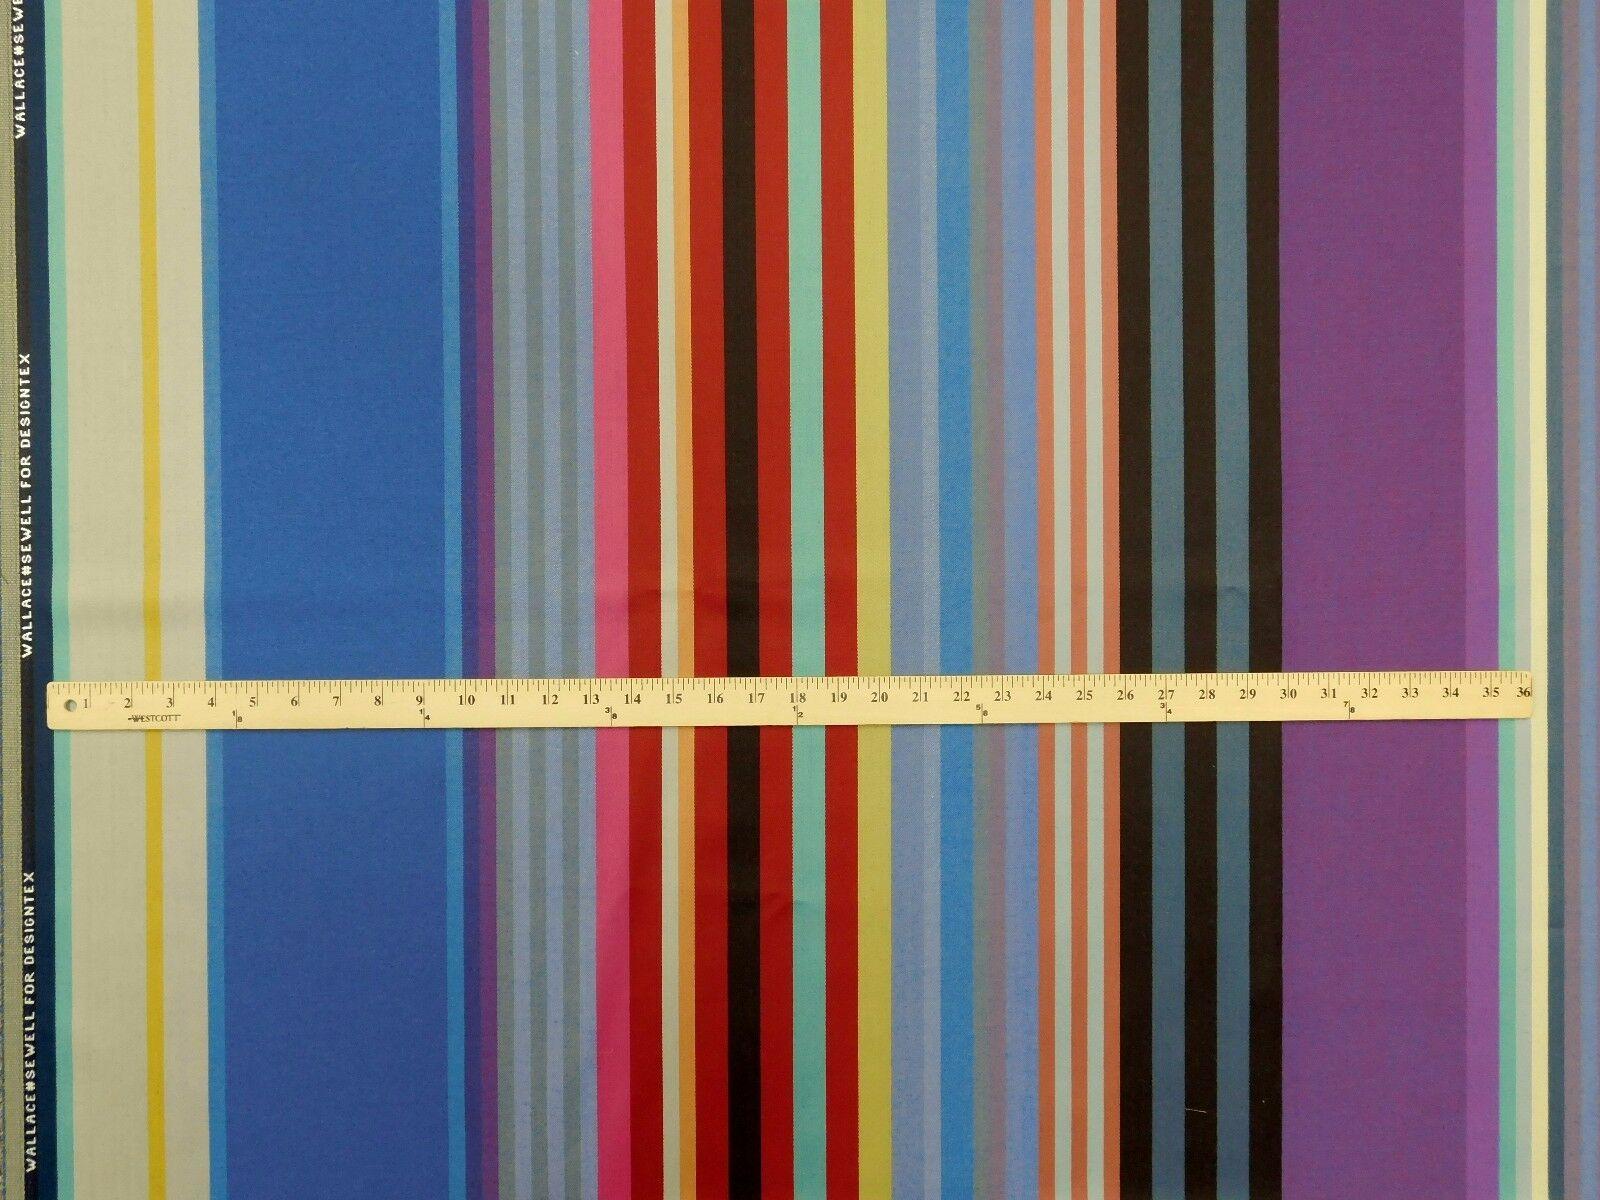 Modern Designtex Clarkenwell Royal Wool Textile, Wallace and Sewell, UK, Cooper Hewitt For Sale